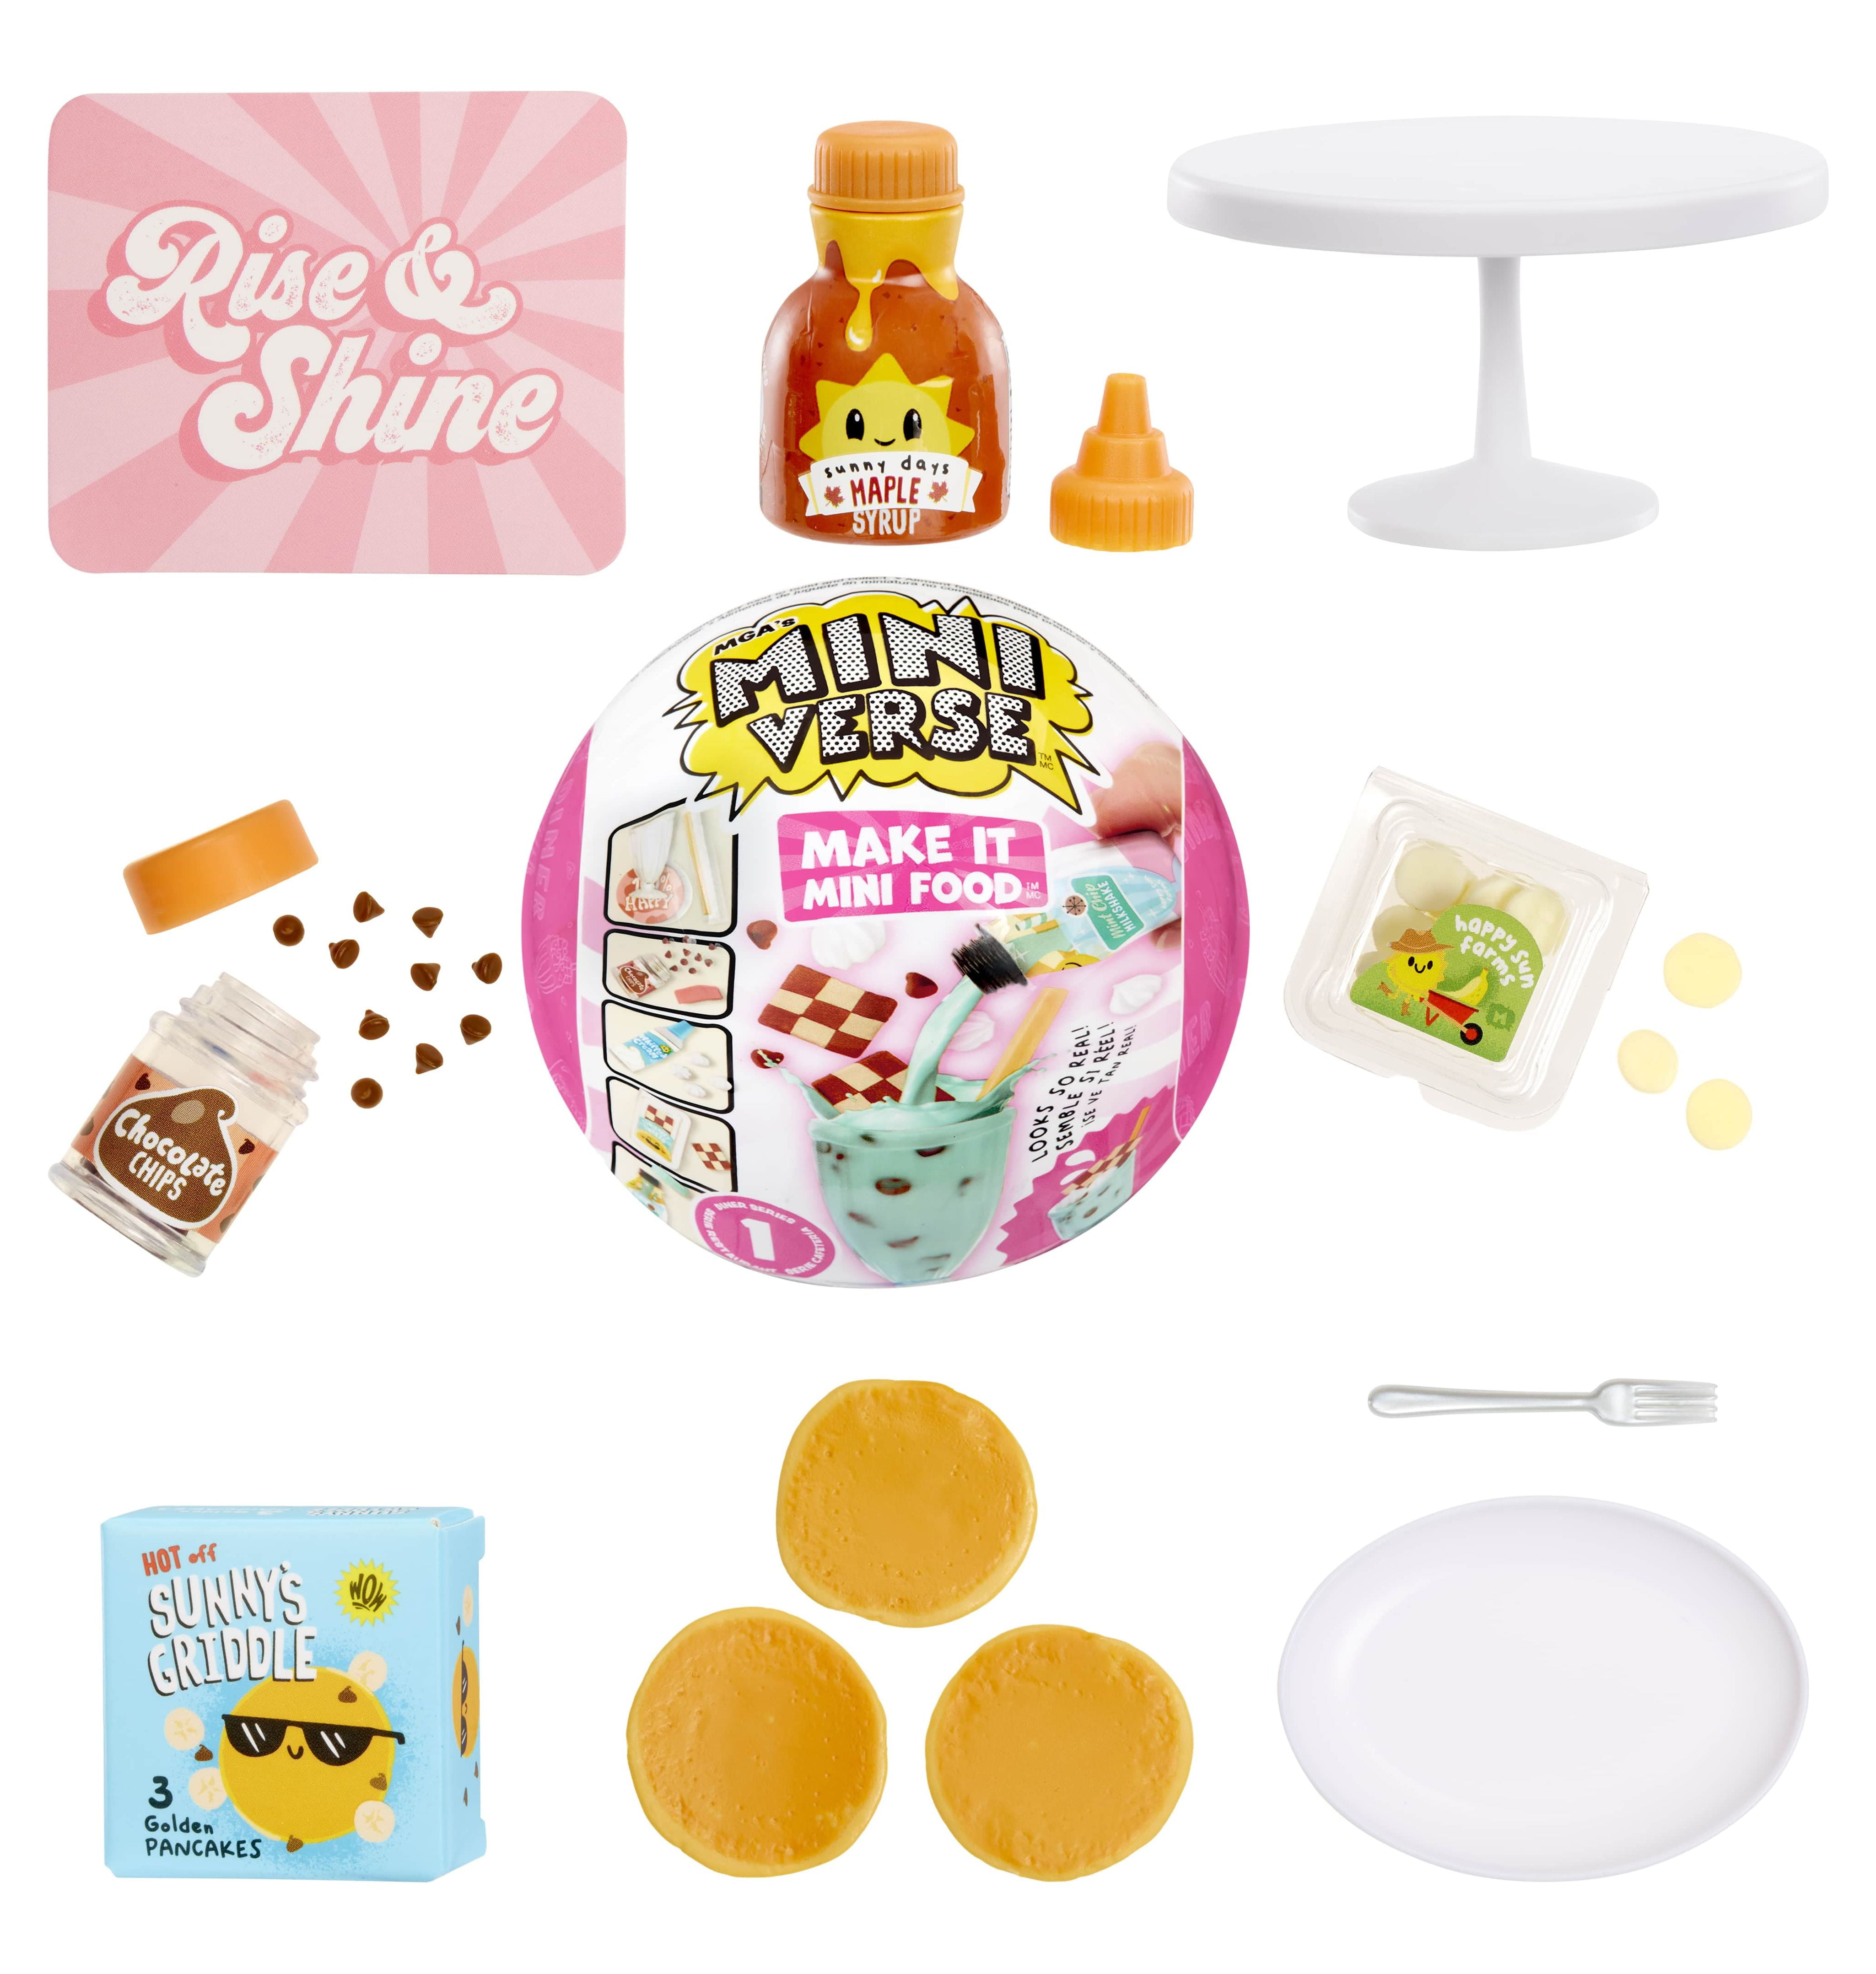  MGA's Miniverse Make It Mini Food Pizza Party  Exclusive,  Mini Collectibles, DIY, Resin Play, Replica Food, NOT Edible, Collectors,  8+ : Toys & Games